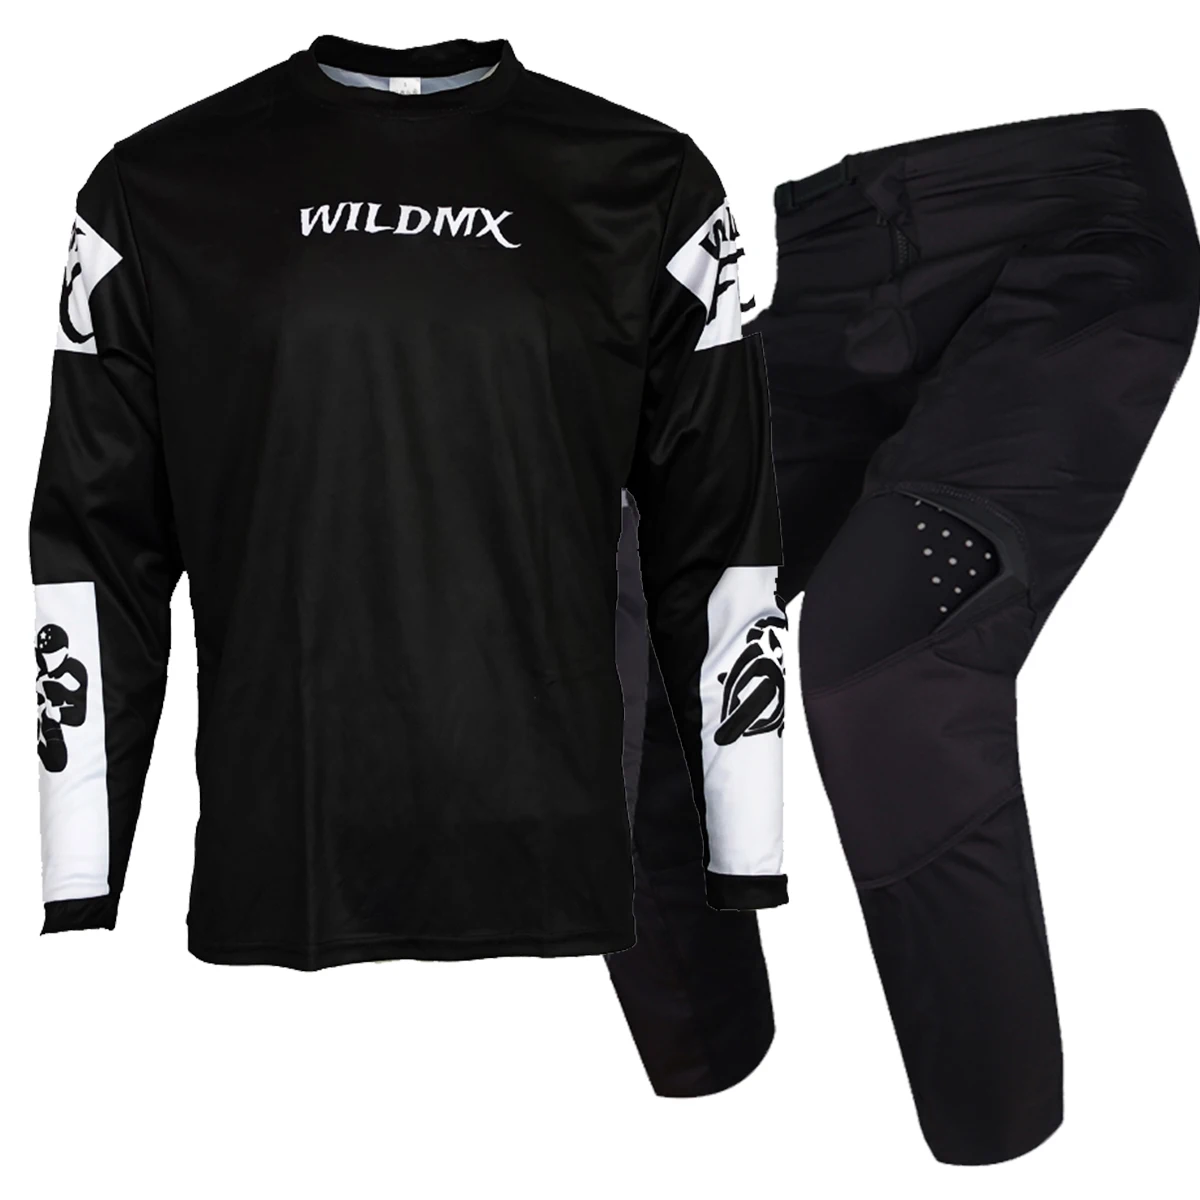 

WILDMX 2021 180 REVN Motocross Jersey And Pants MX Downhill Dirt Bike Racing Suits Mountain MTB DH Off-road Combo, 5 color